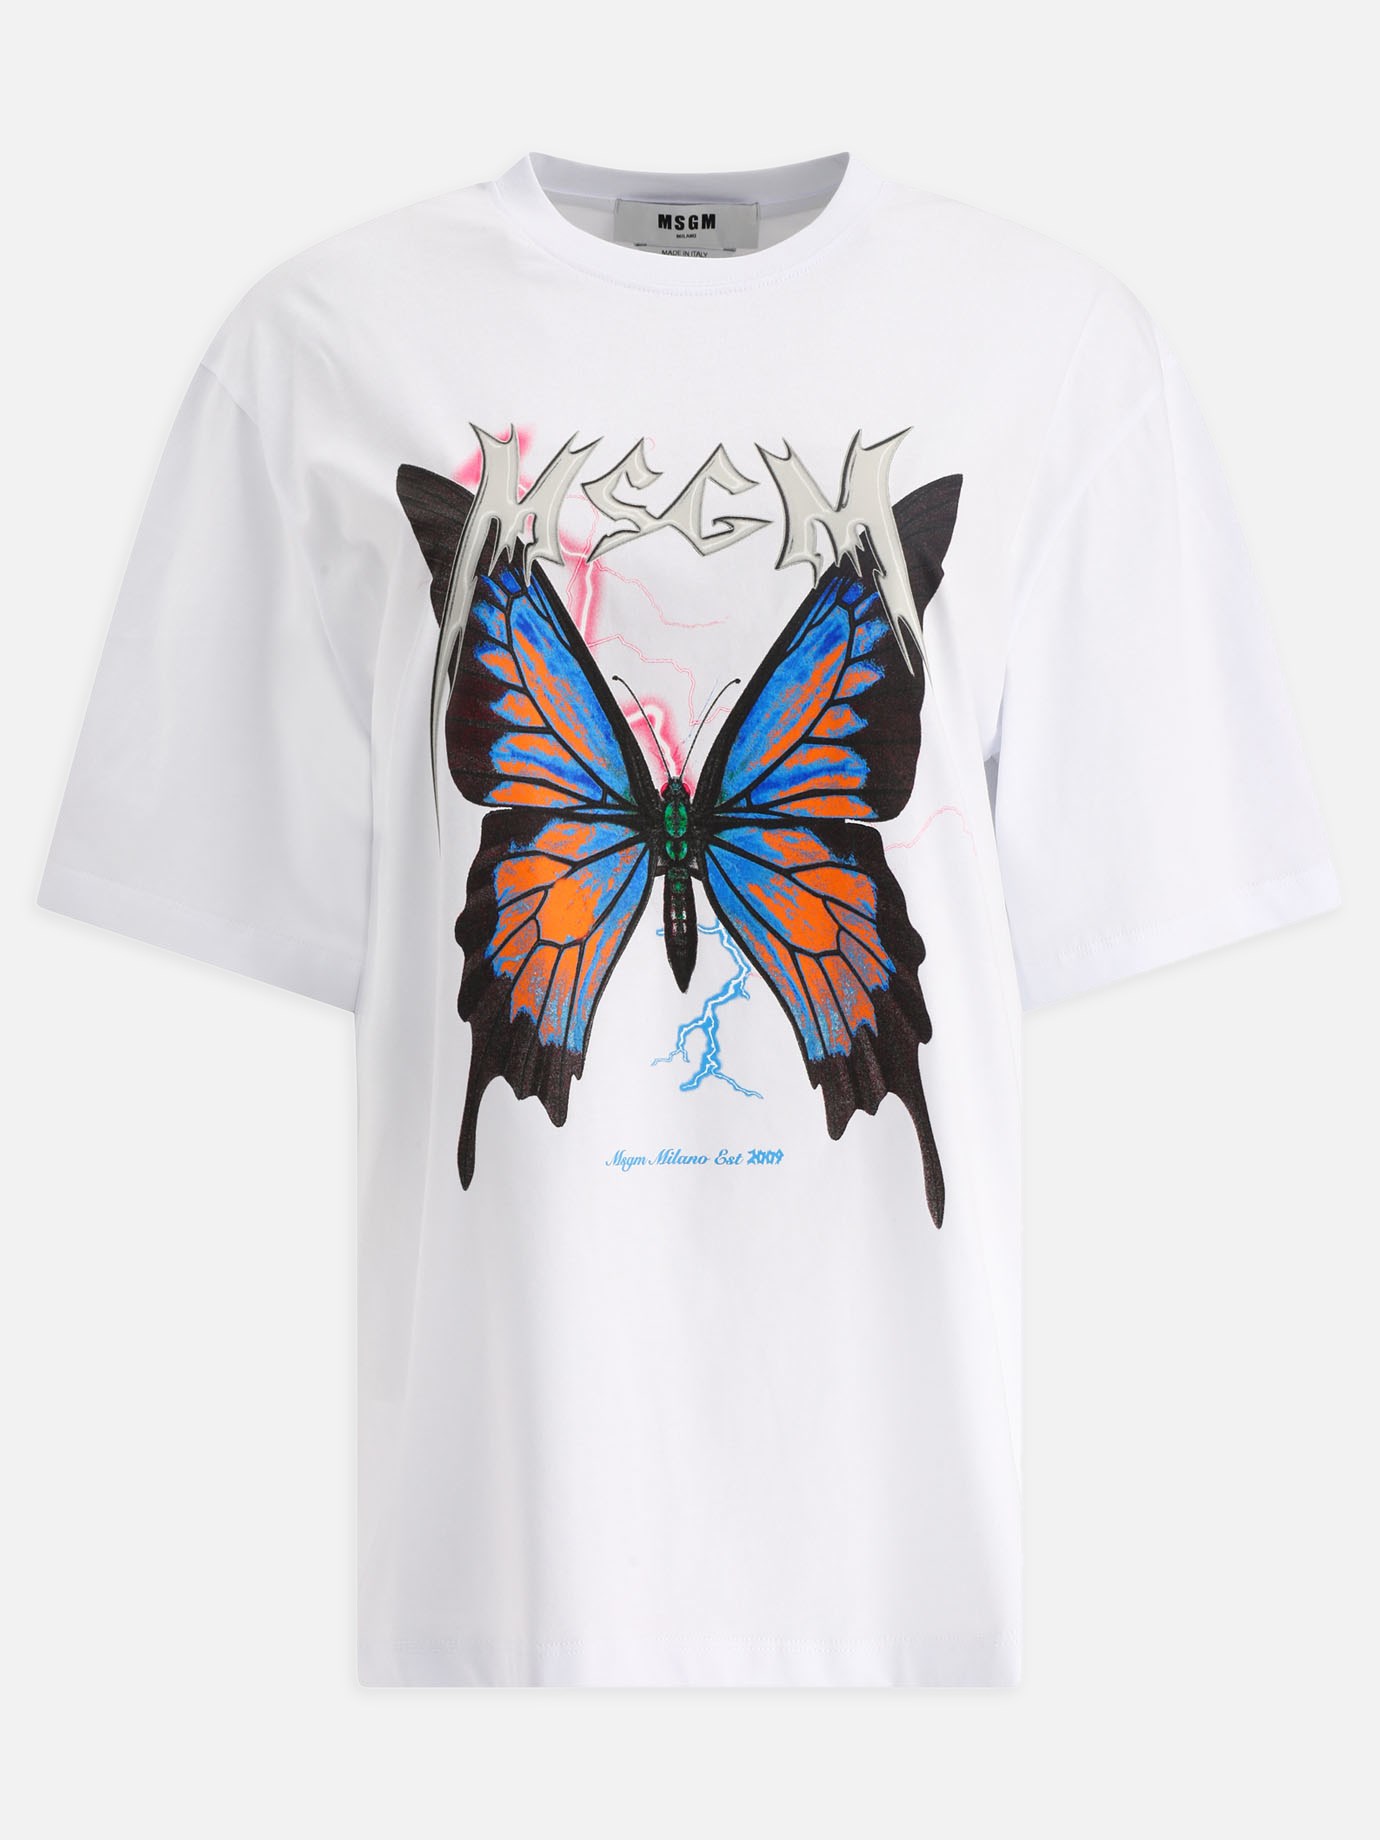  Butterfly  t-shirtby Msgm - 4